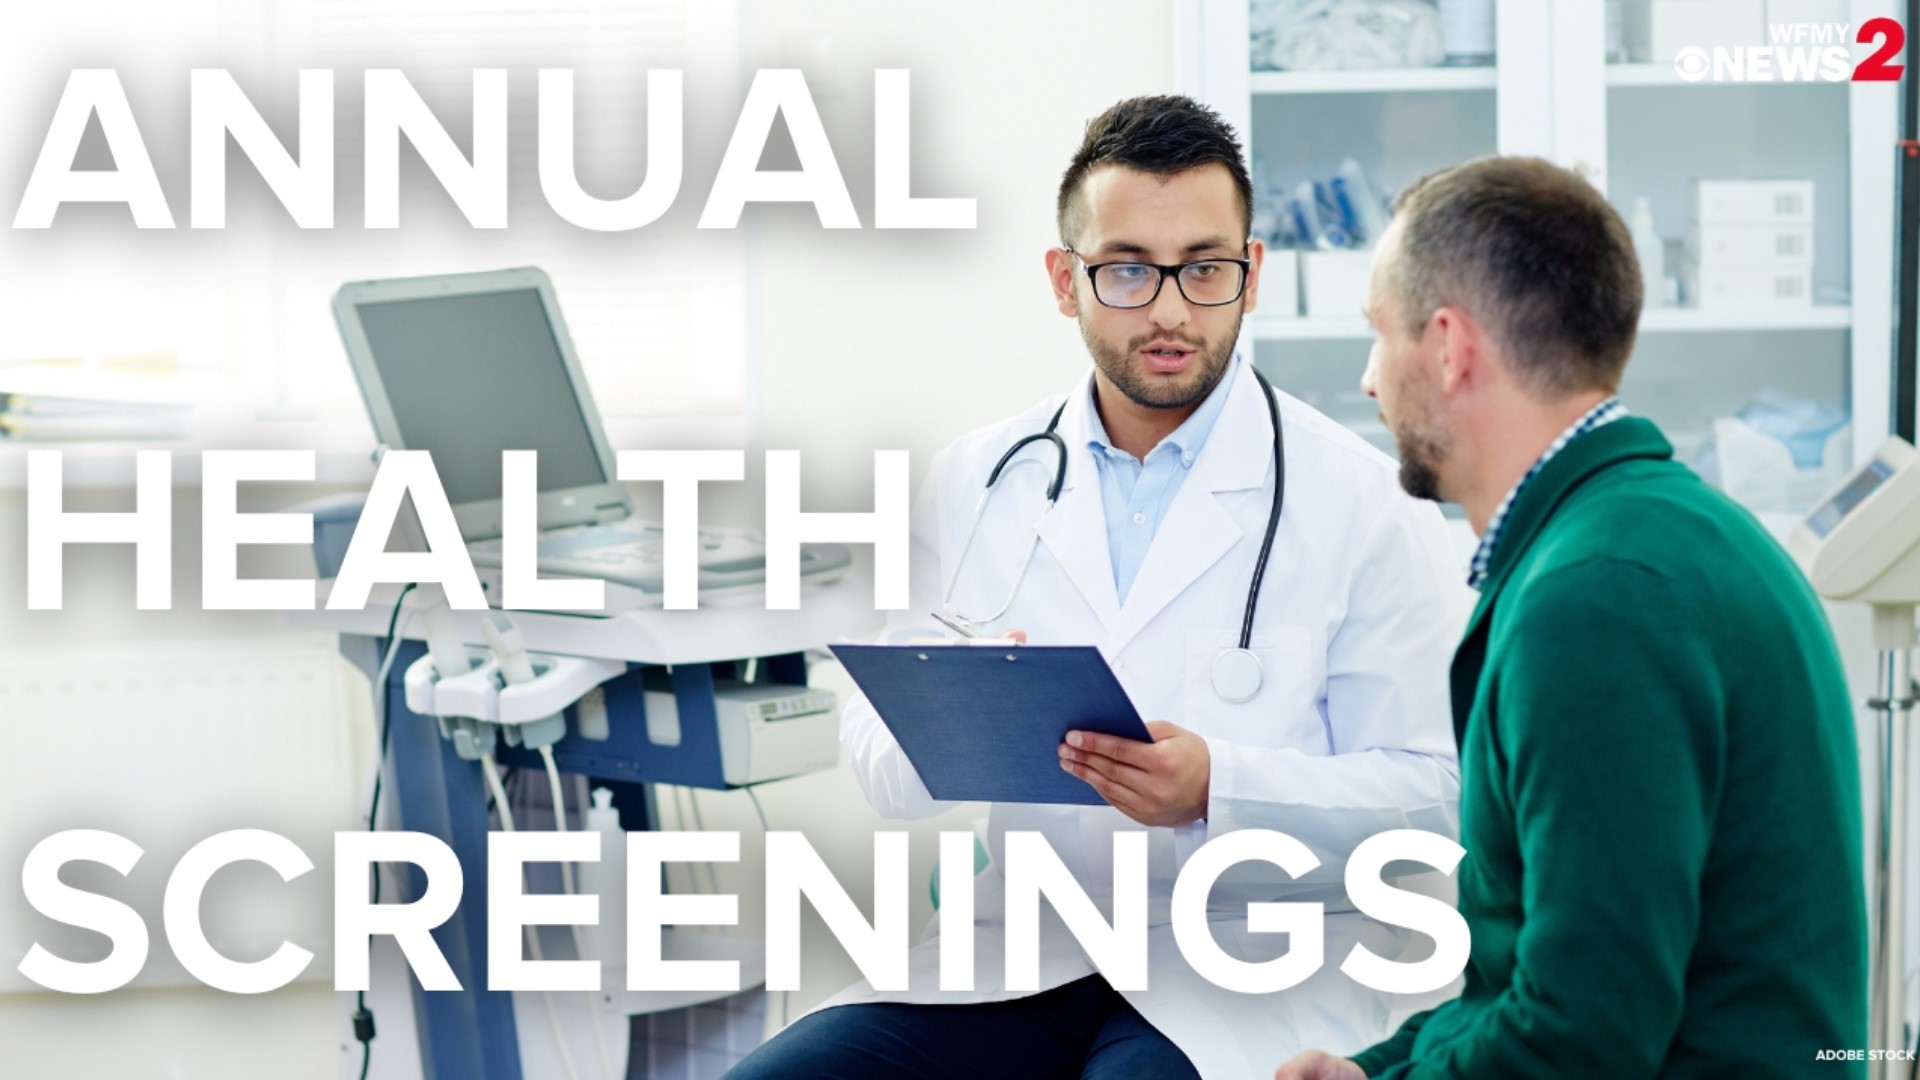 Preventative health care services like screenings and annual wellness exams are so important for maintaining your well-being.